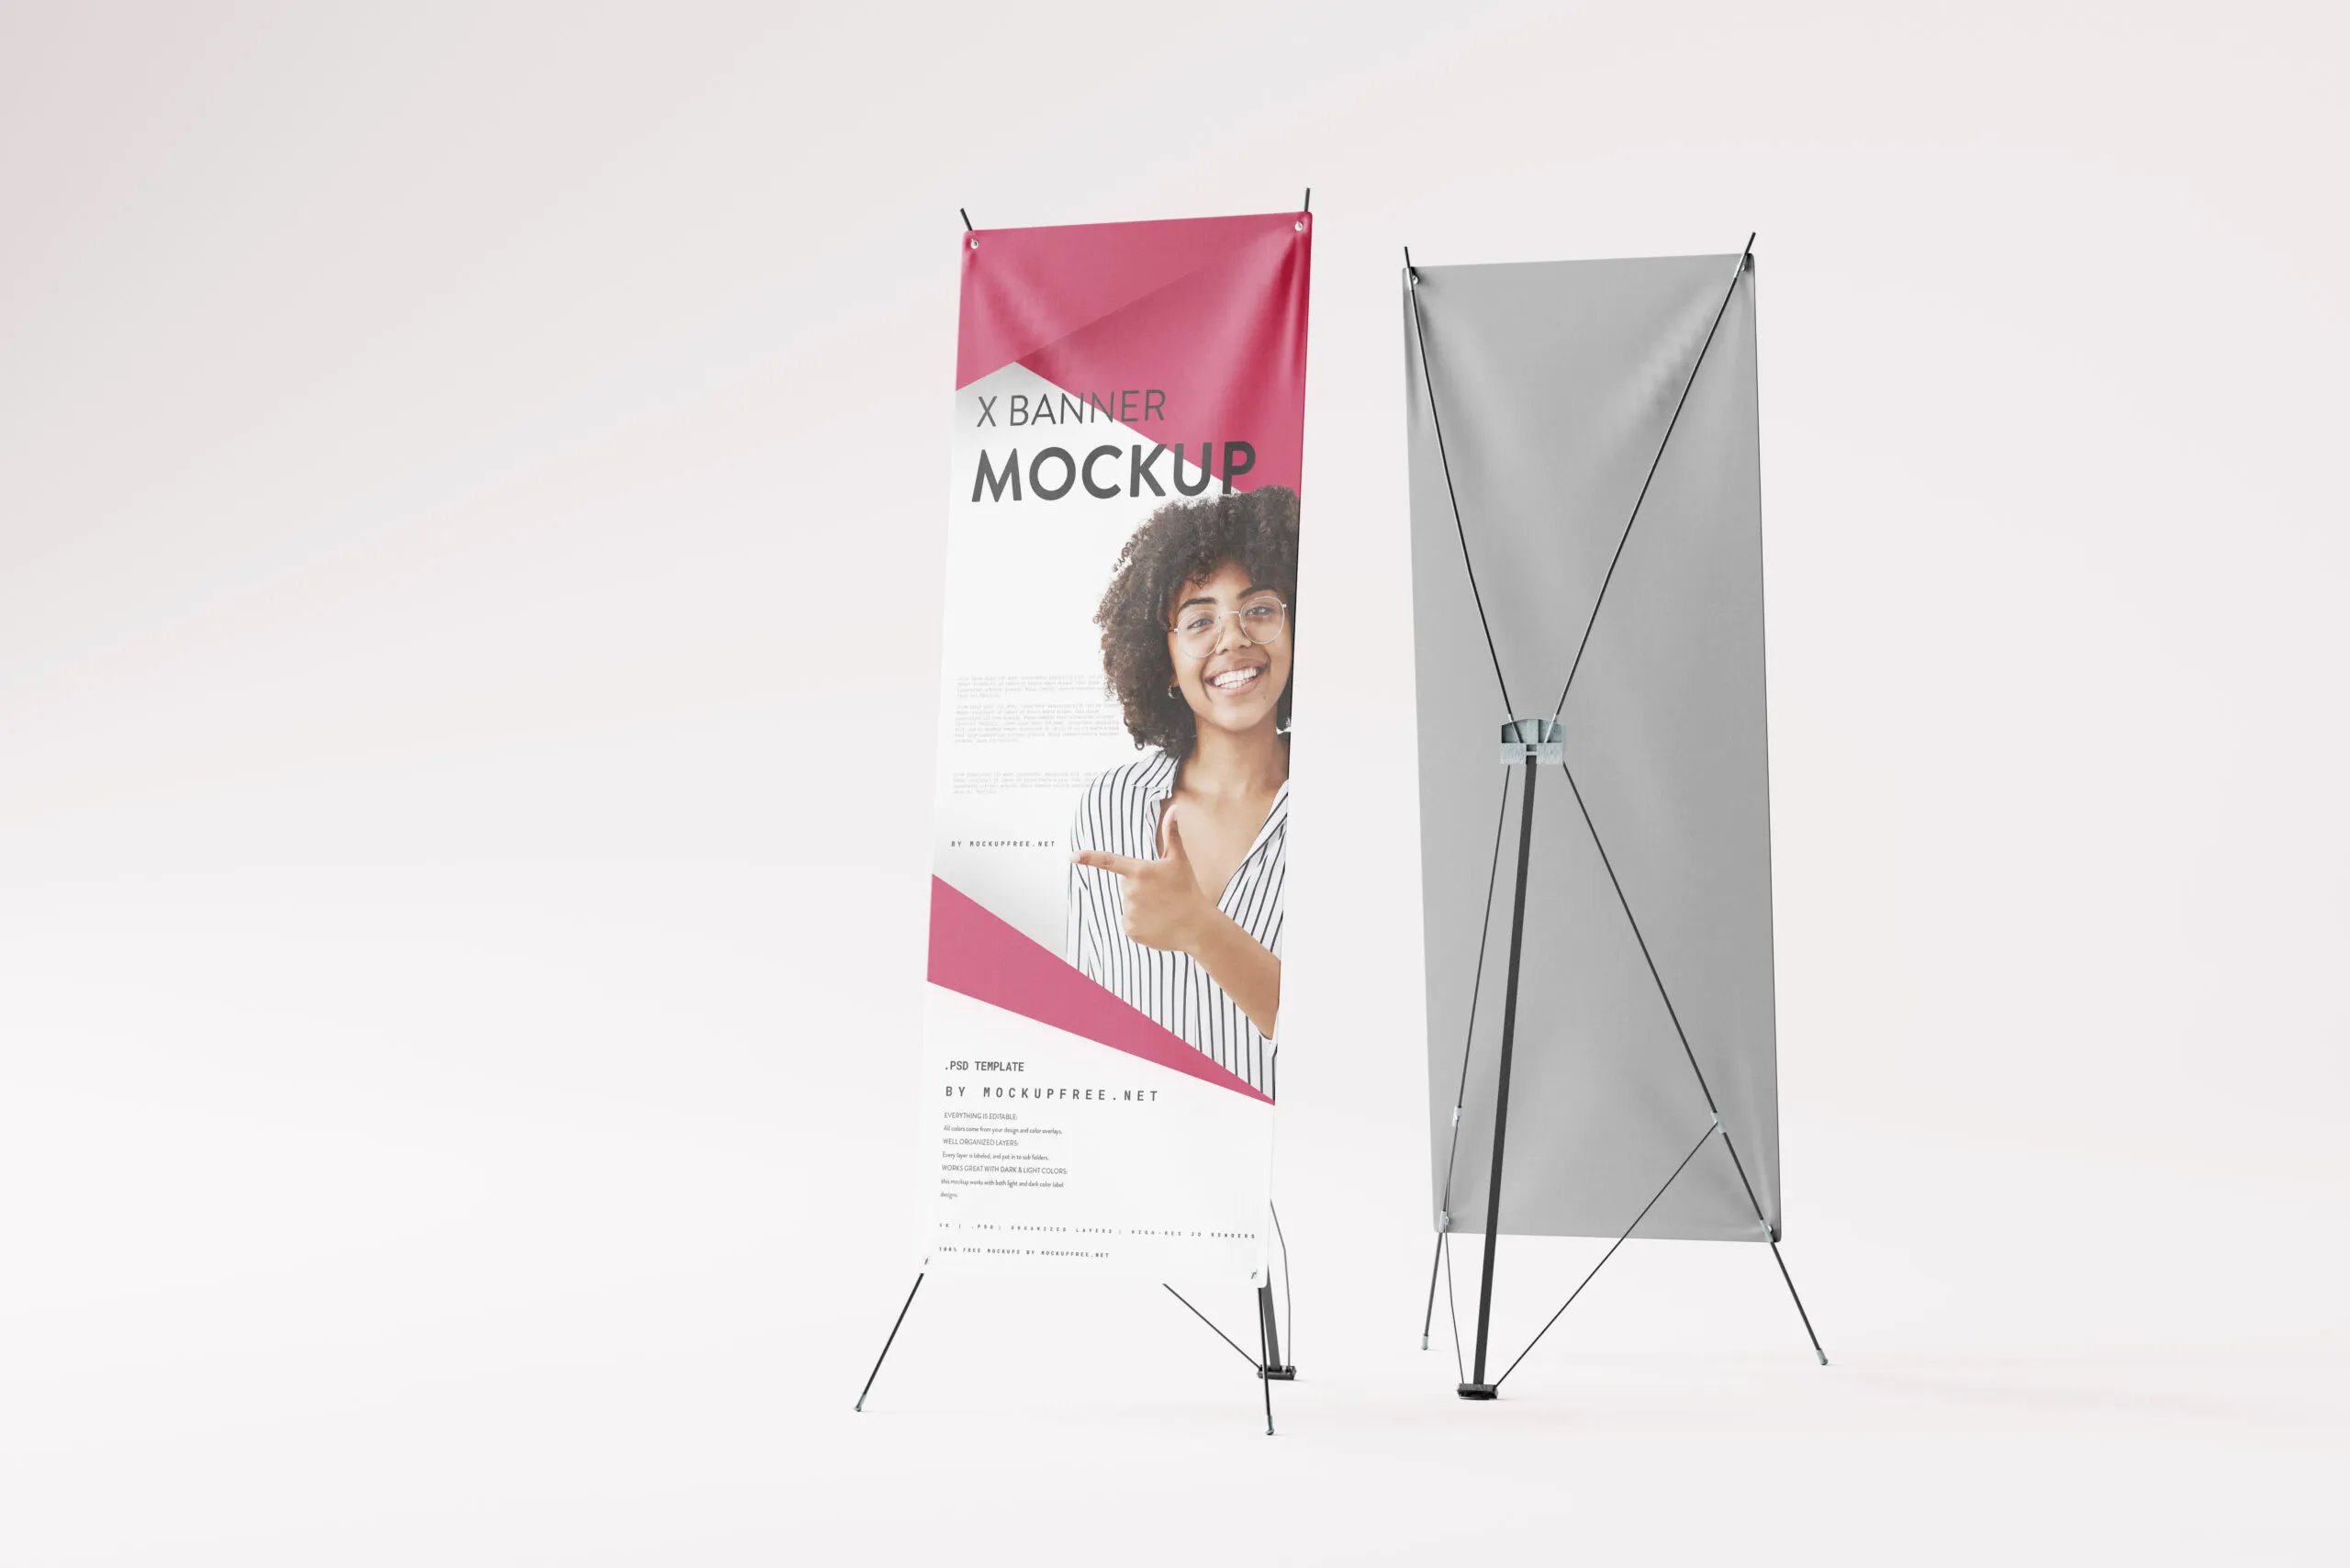 5 X Banner Mockups in Varied Visions FREE PSD